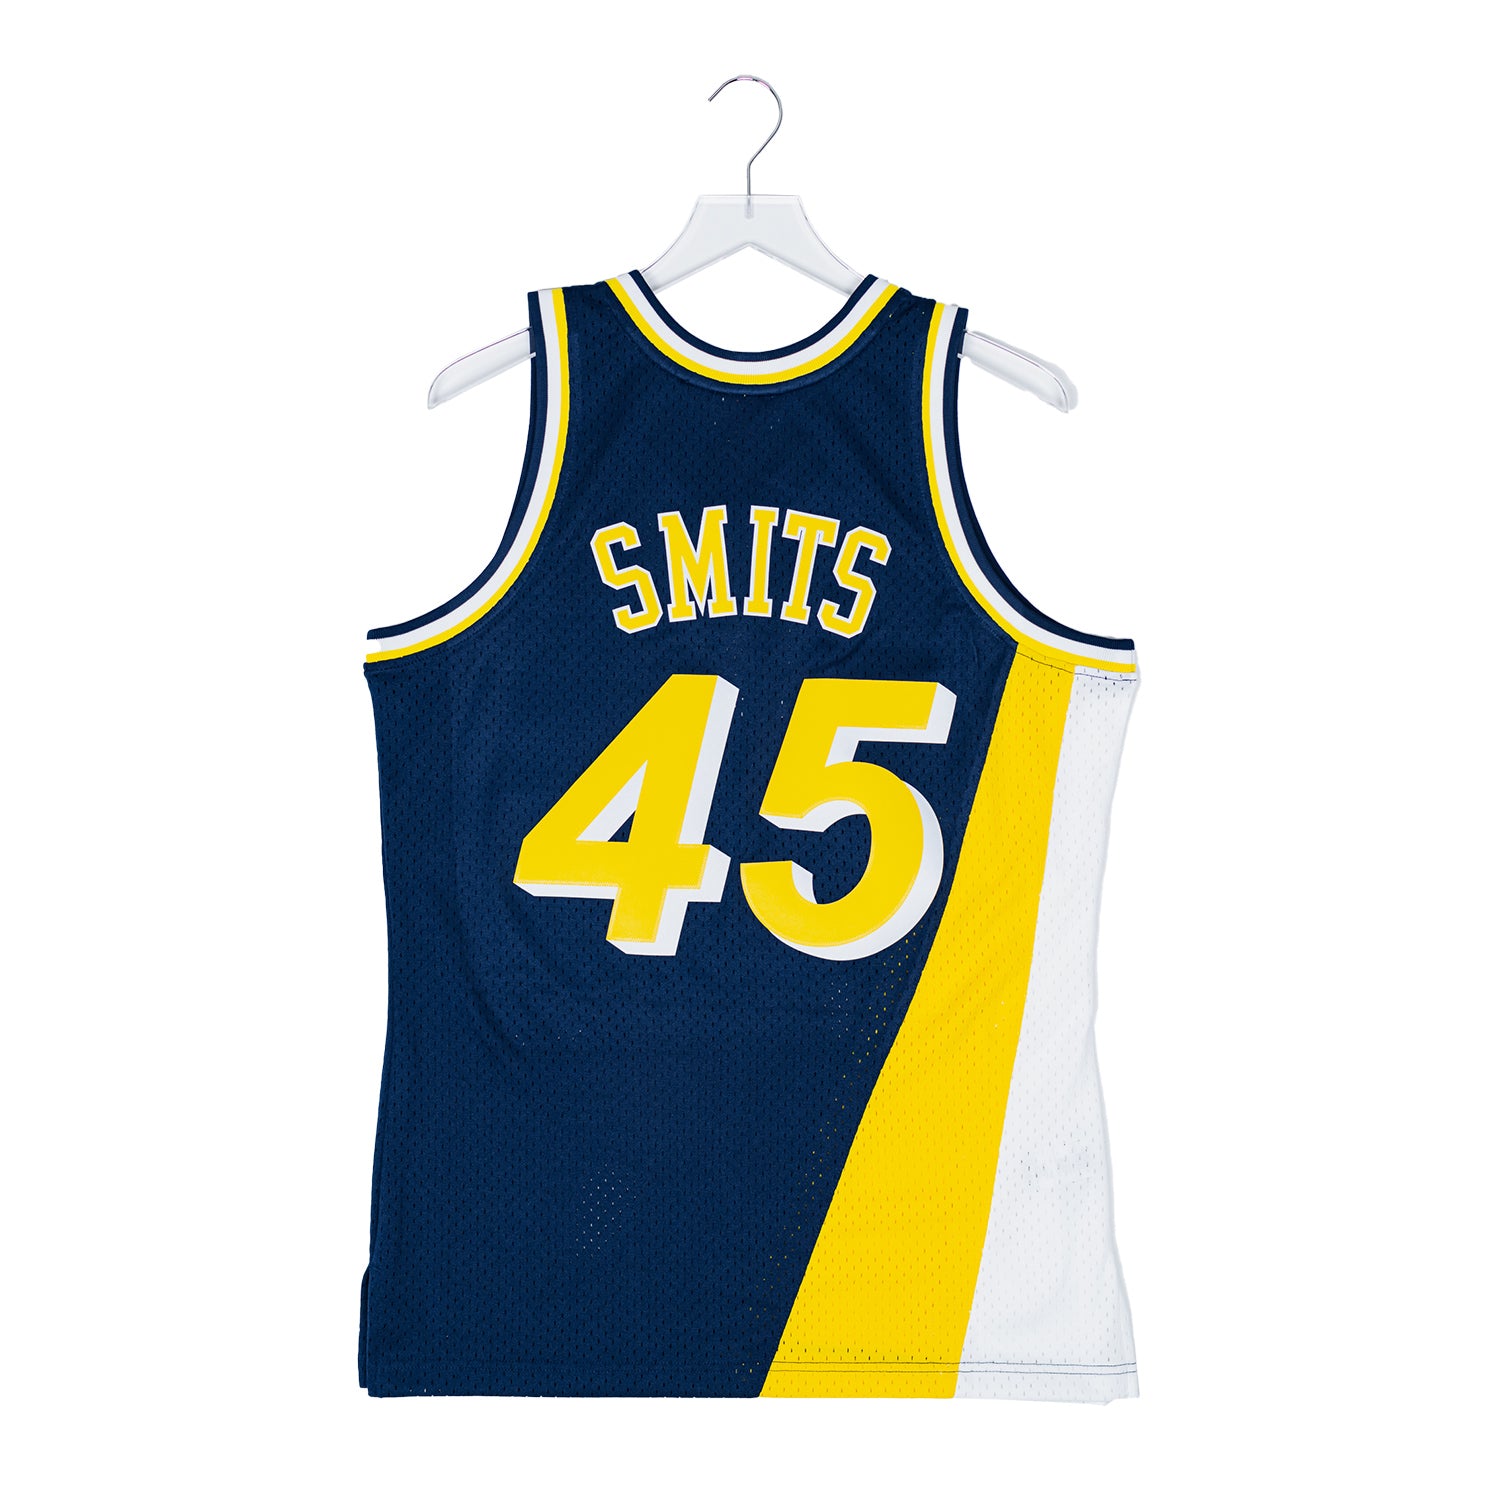 Pacers Team Store - Attending the game tomorrow? Join us for a free in-store  signing with Rik smits. Get your exclusive Flo-Jo jersey and meet  #TheDunkingDutchman 🎟️: ONLY AVAILABLE FOR TICKETED GUESTS